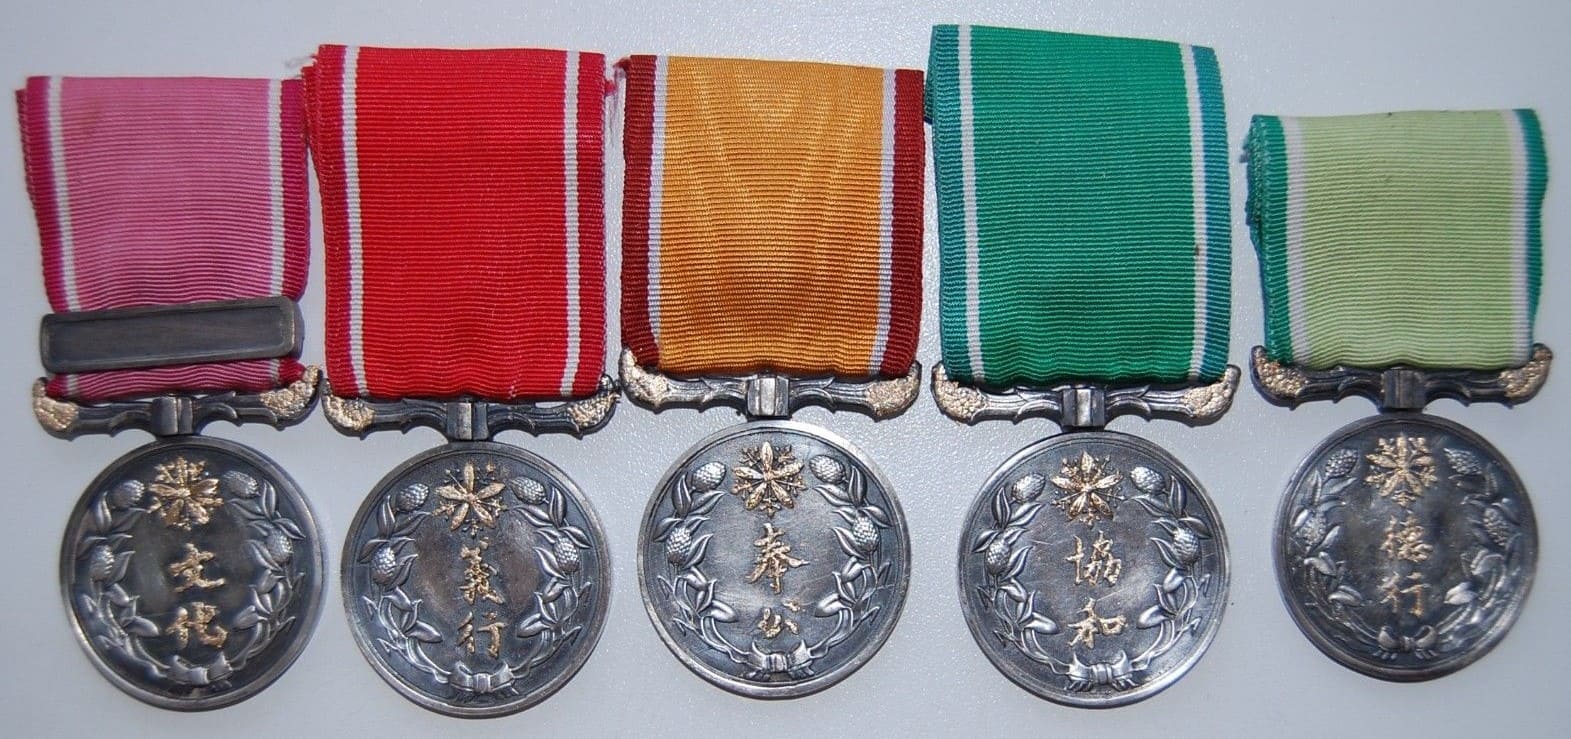 Fake Medals on Ribbons.jpg